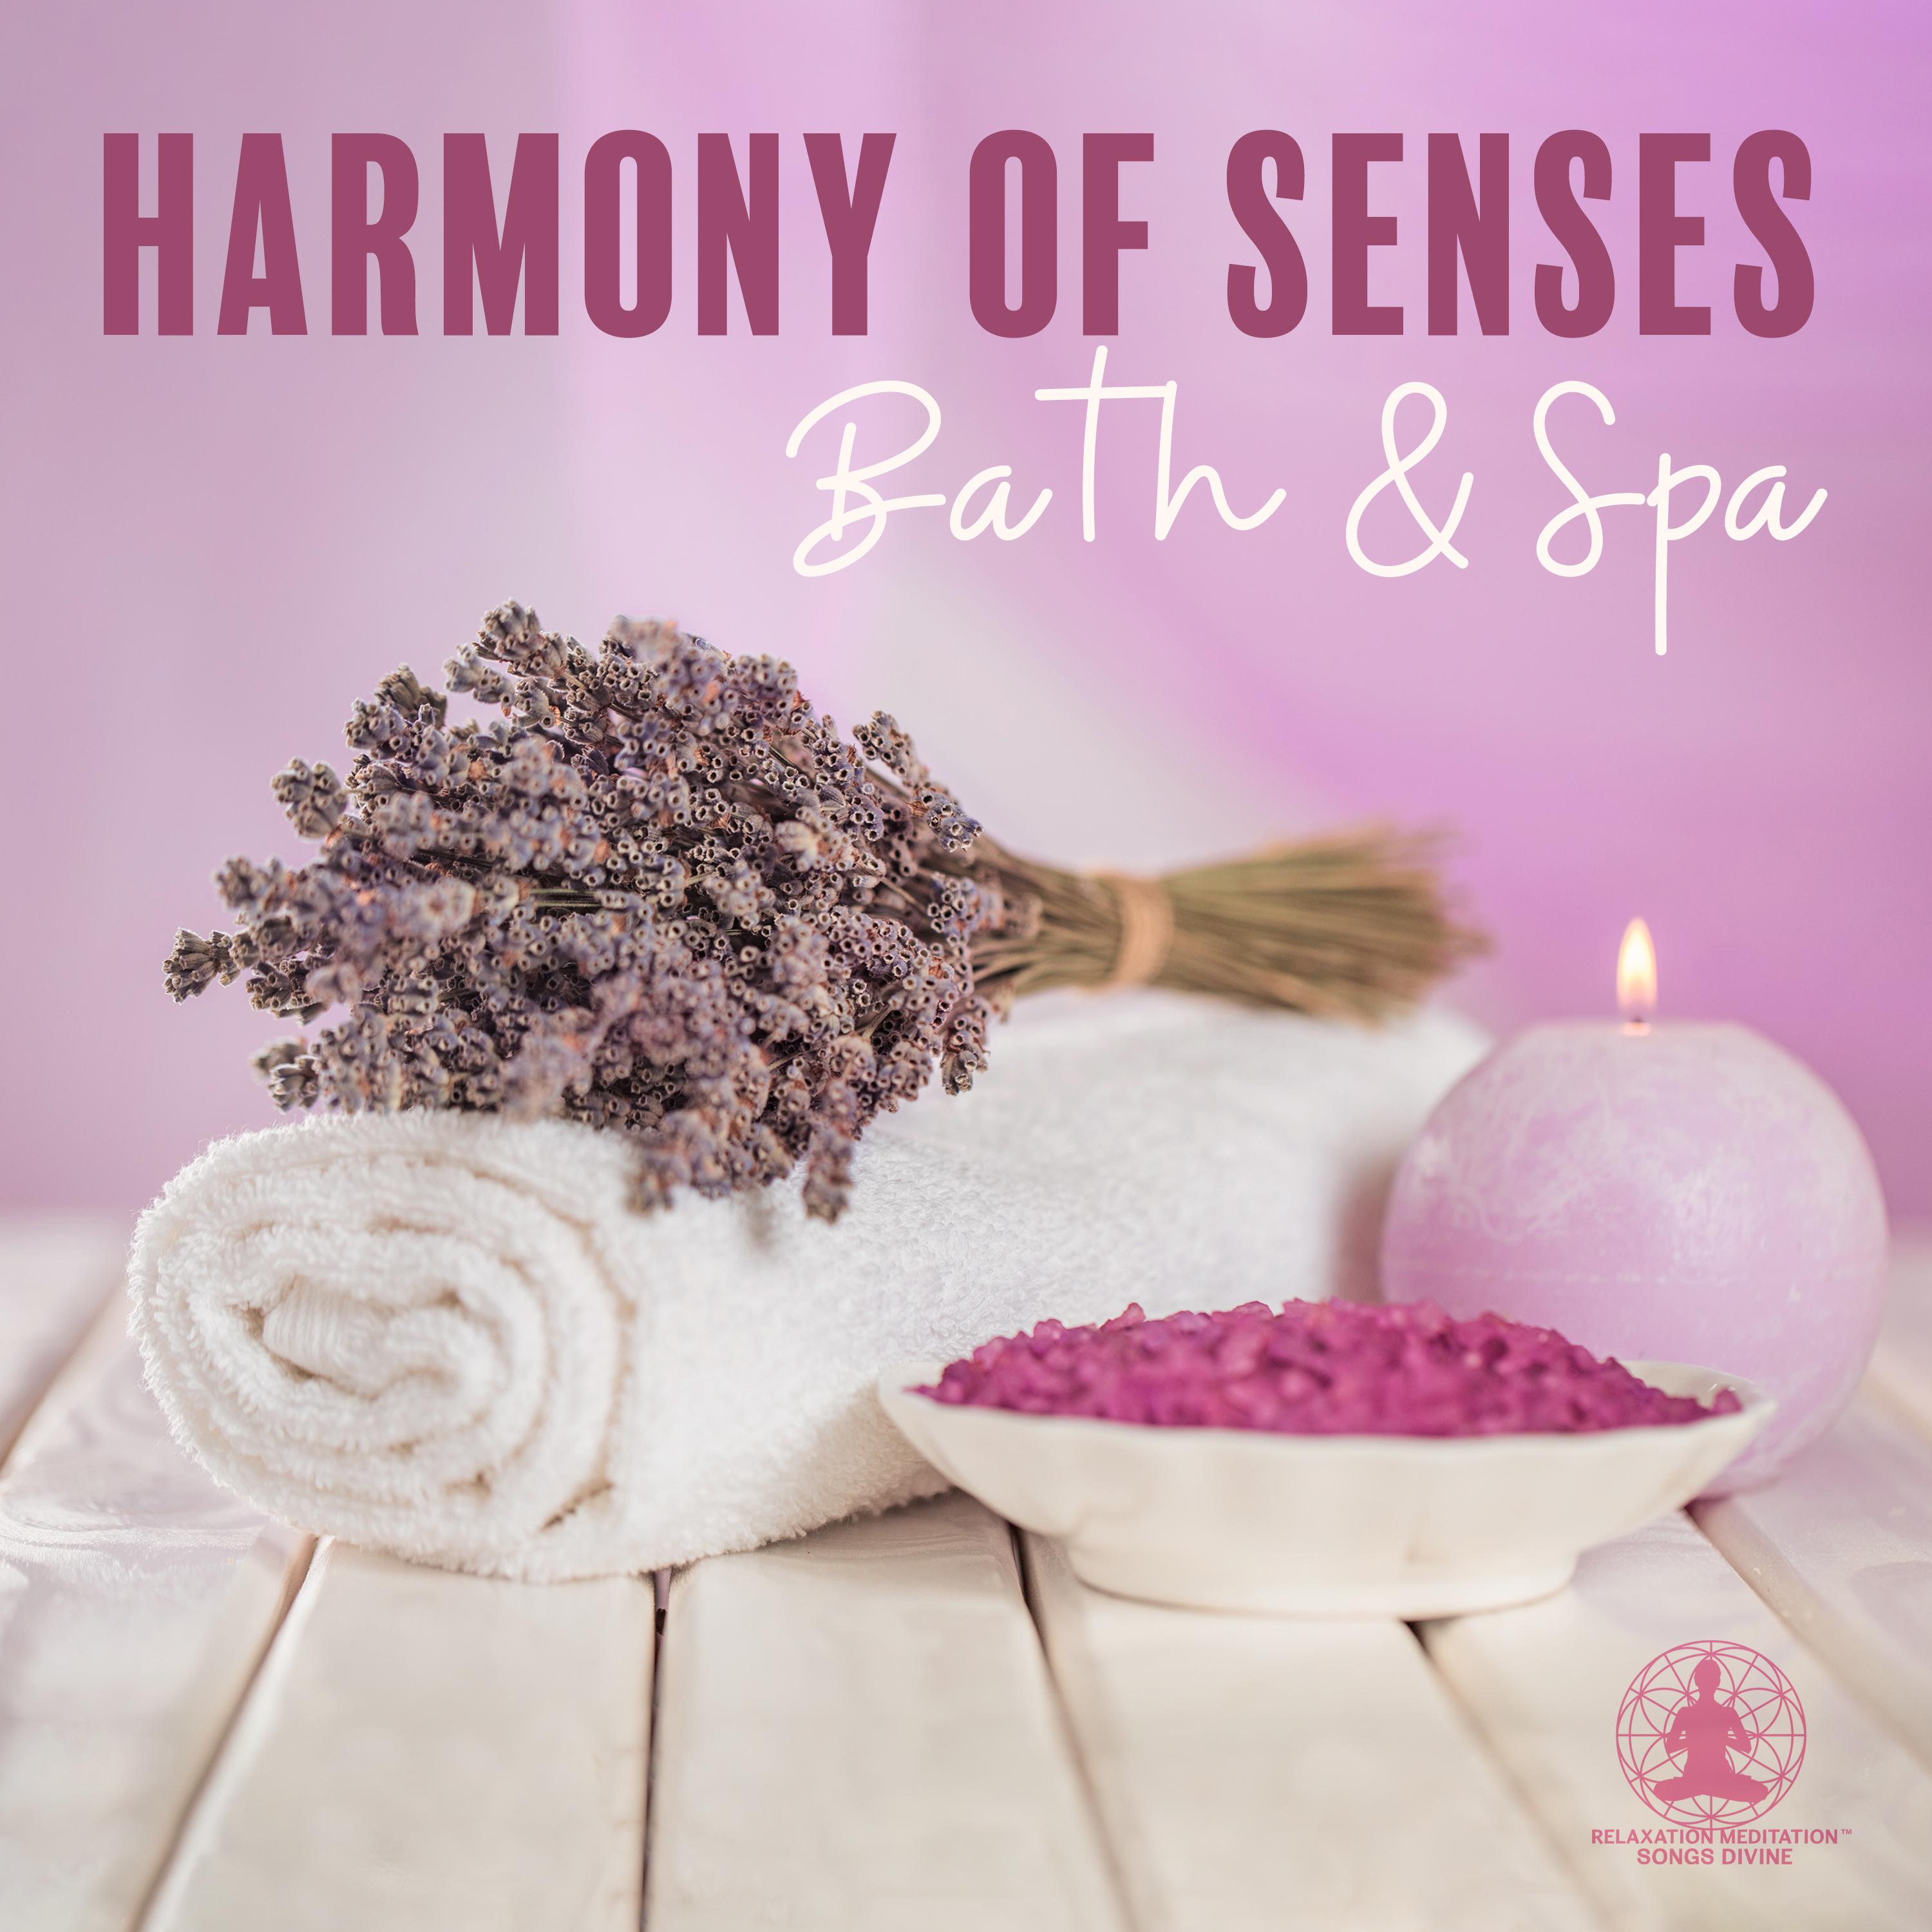 Harmony of Senses (Bath & Spa, Relaxation Meditation, Massage, Songs Divine, Stress Control, Relief Pain, Good Sleep, Deep Intimcity Relaxation for Two)